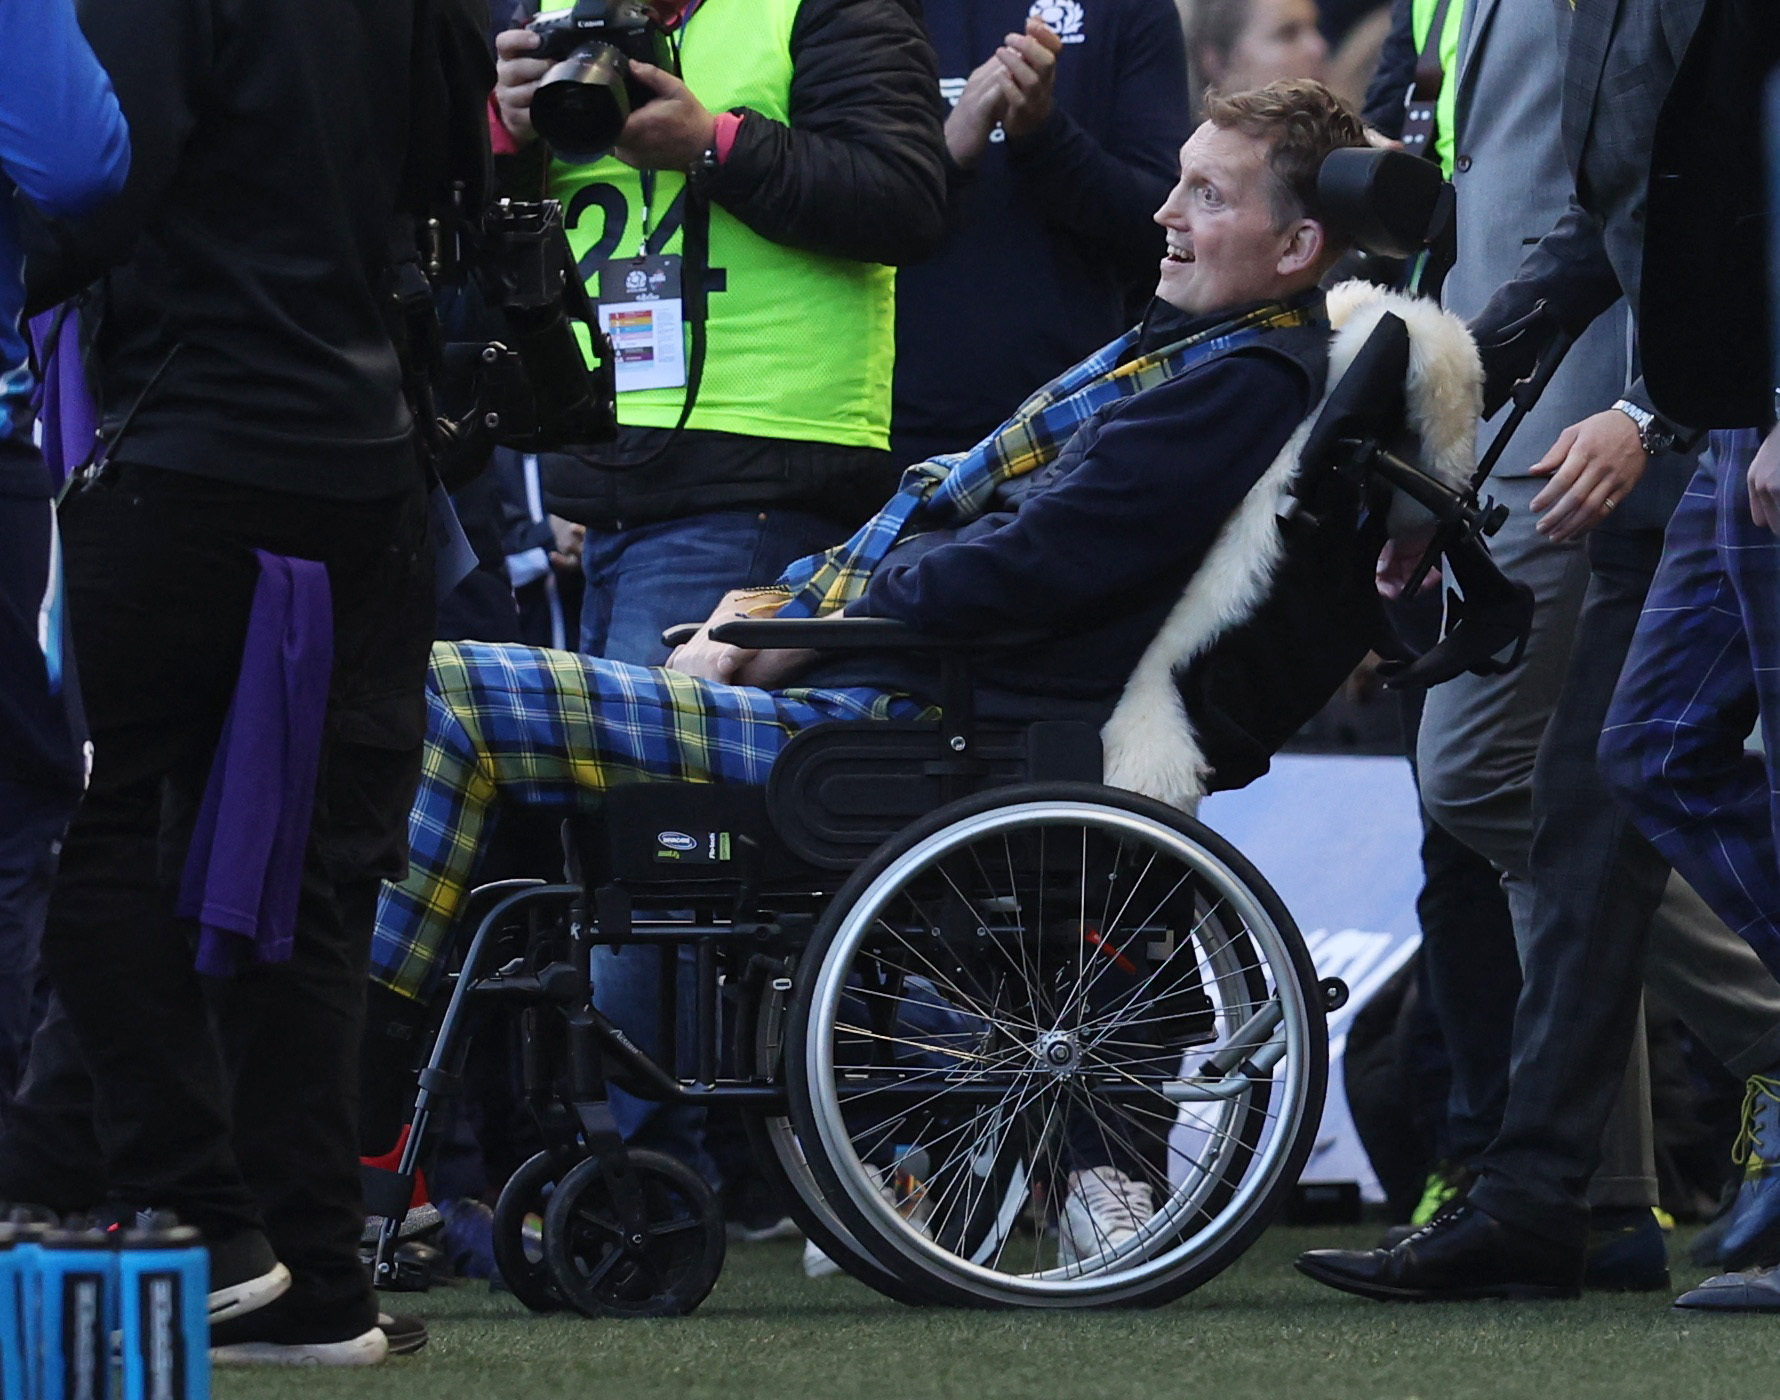 Doddie Weir made an appearance at Murrayfield earlier this month. Photo: Reuters